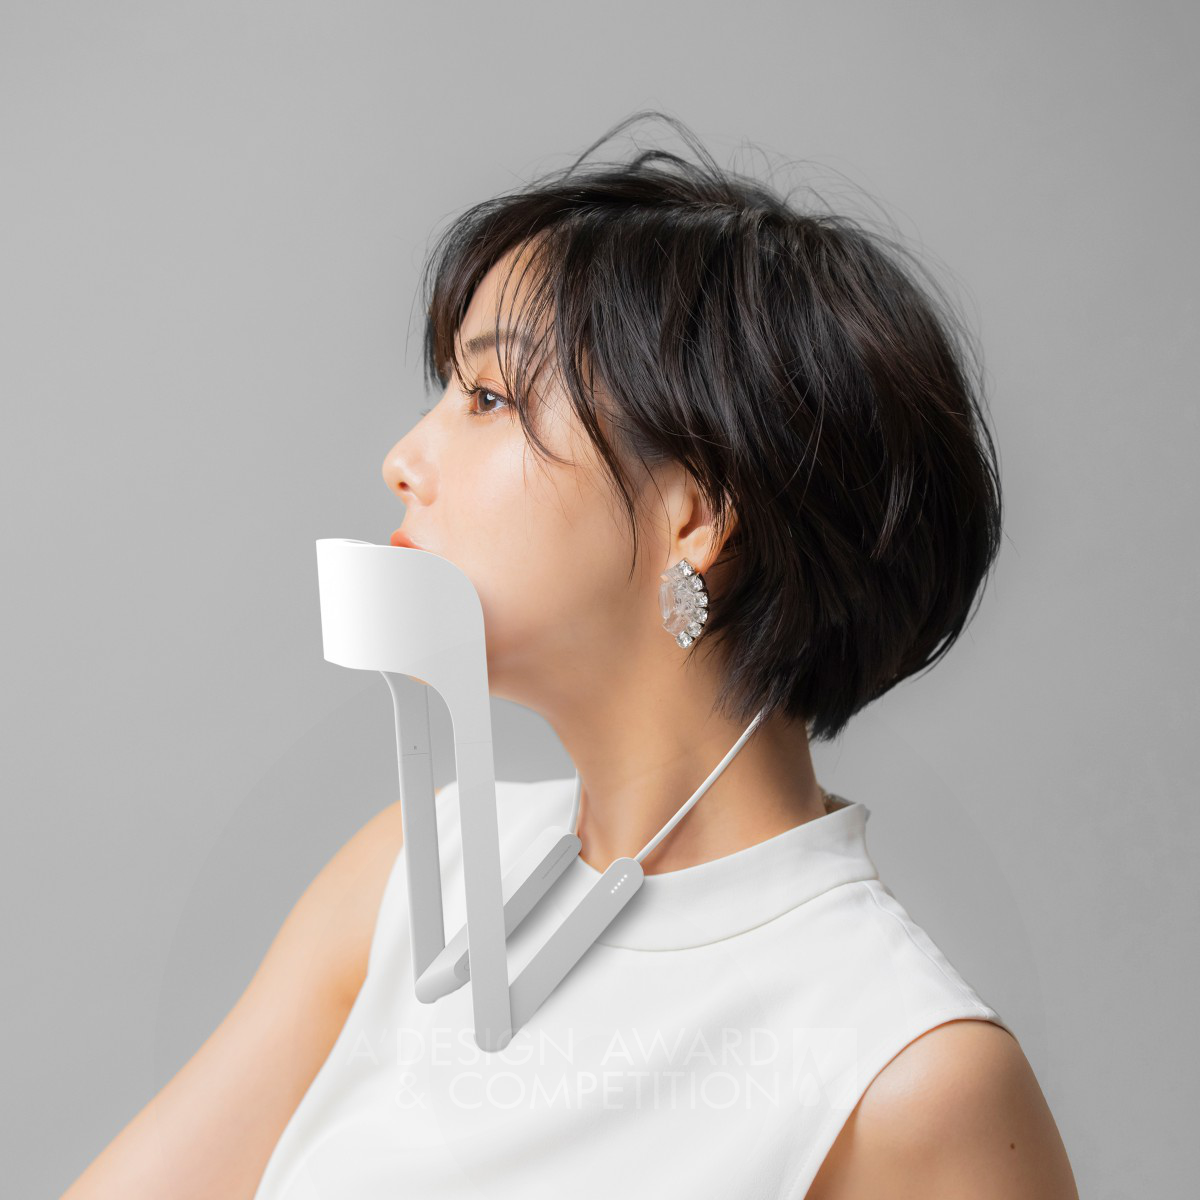 Voice Mask Device That Mutes Your Voice